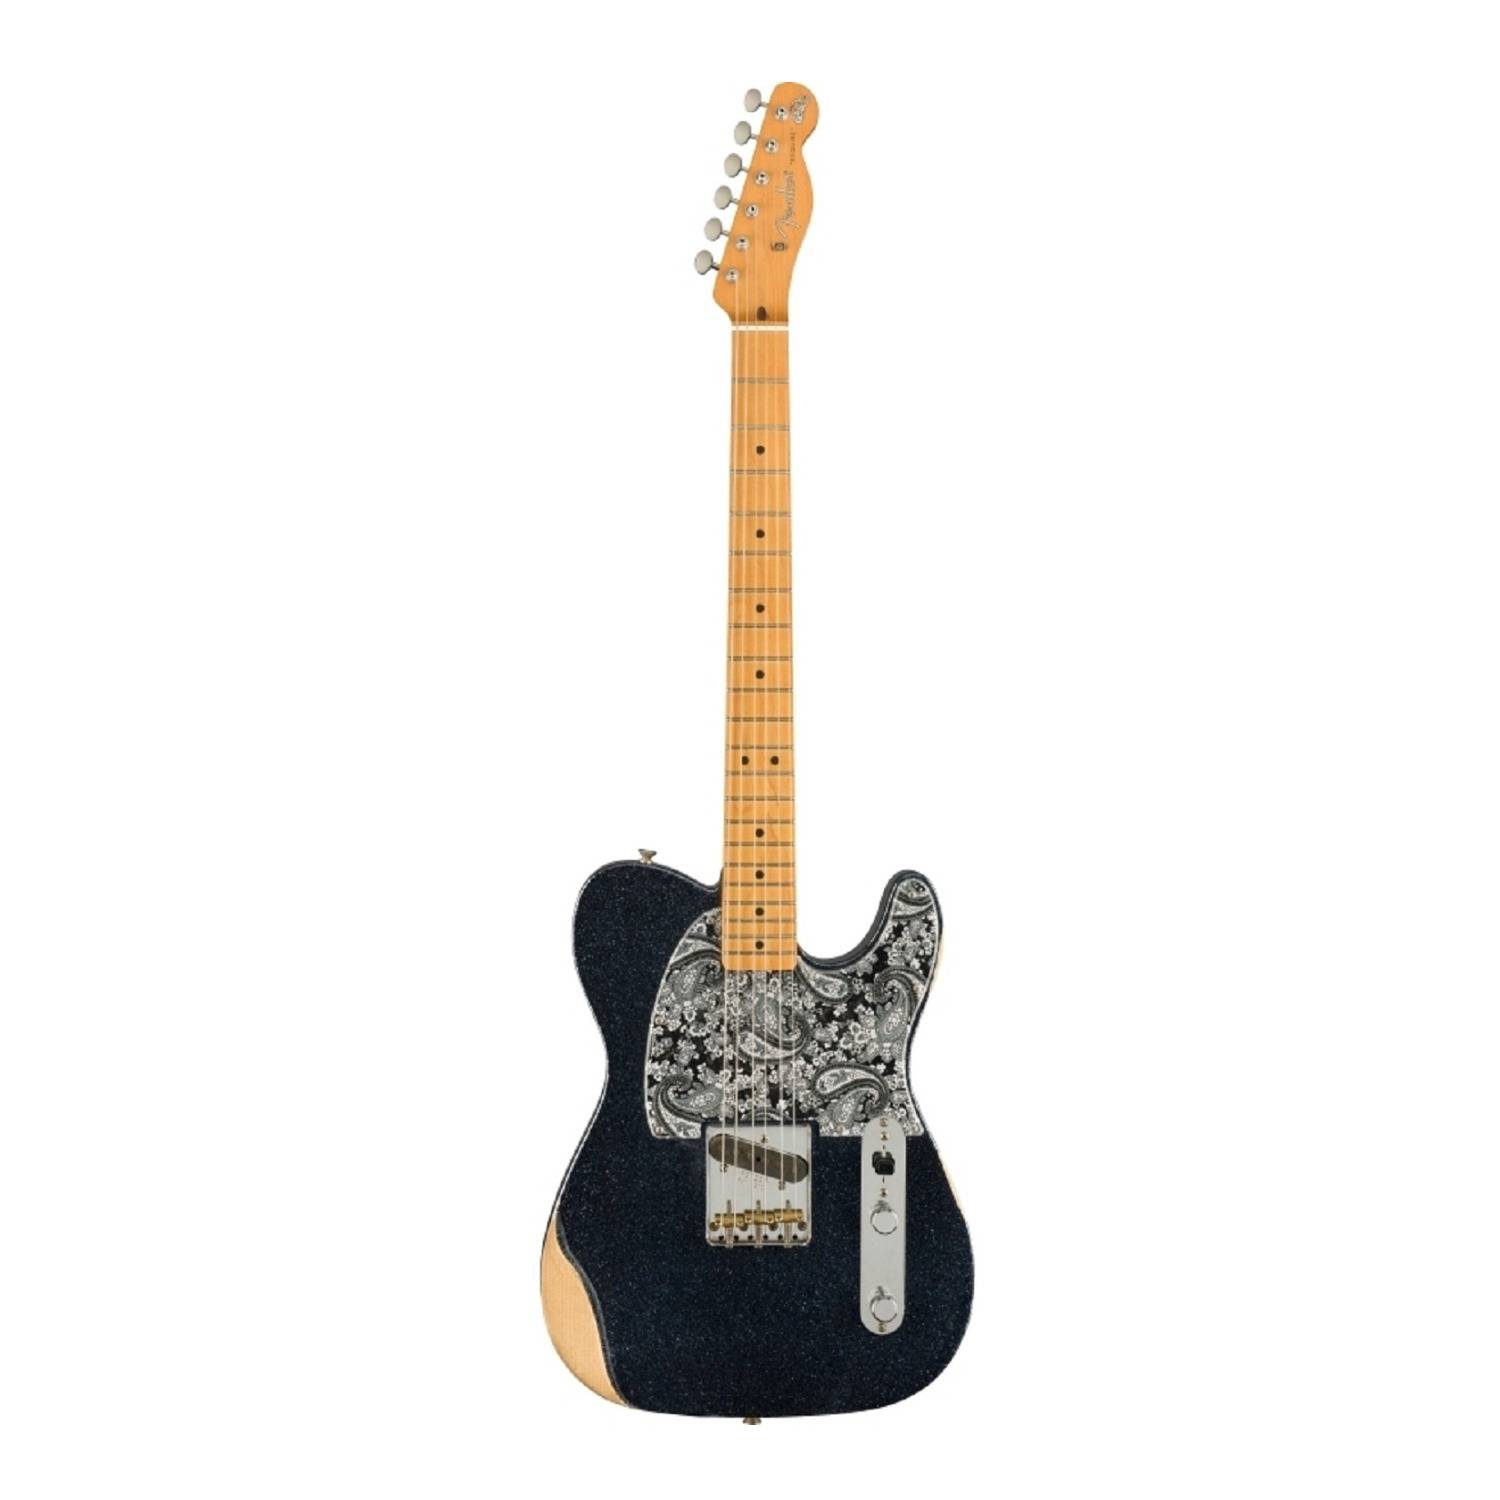 Fender Brad Paisley Esquire 6-String Electric Guitar (Right-Hand, Black Sparkle)